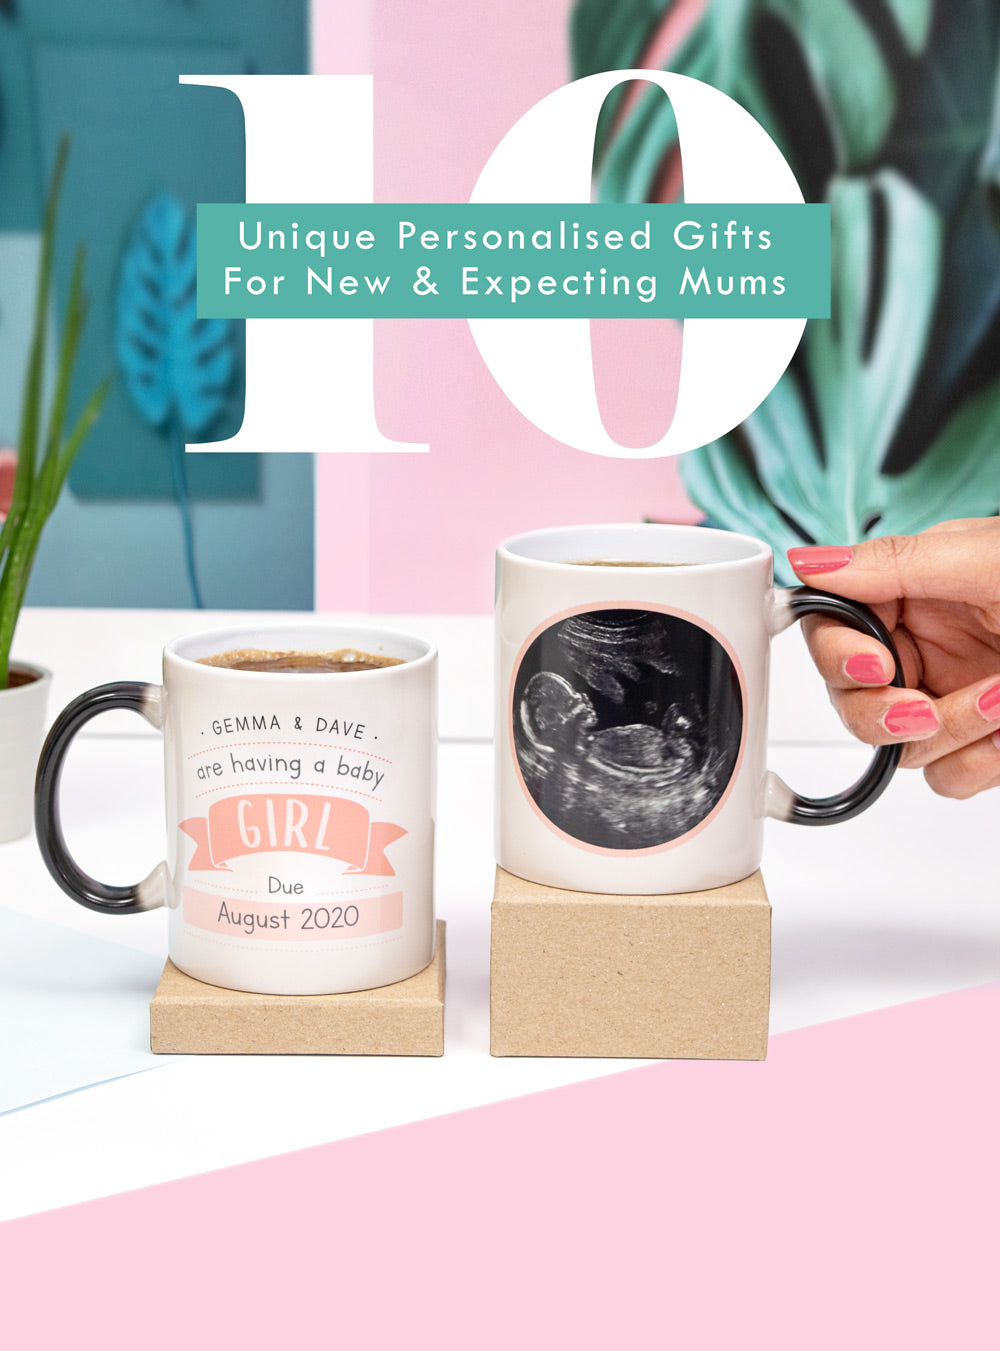 10 Unique Personalised gift ideas for new and expecting mums